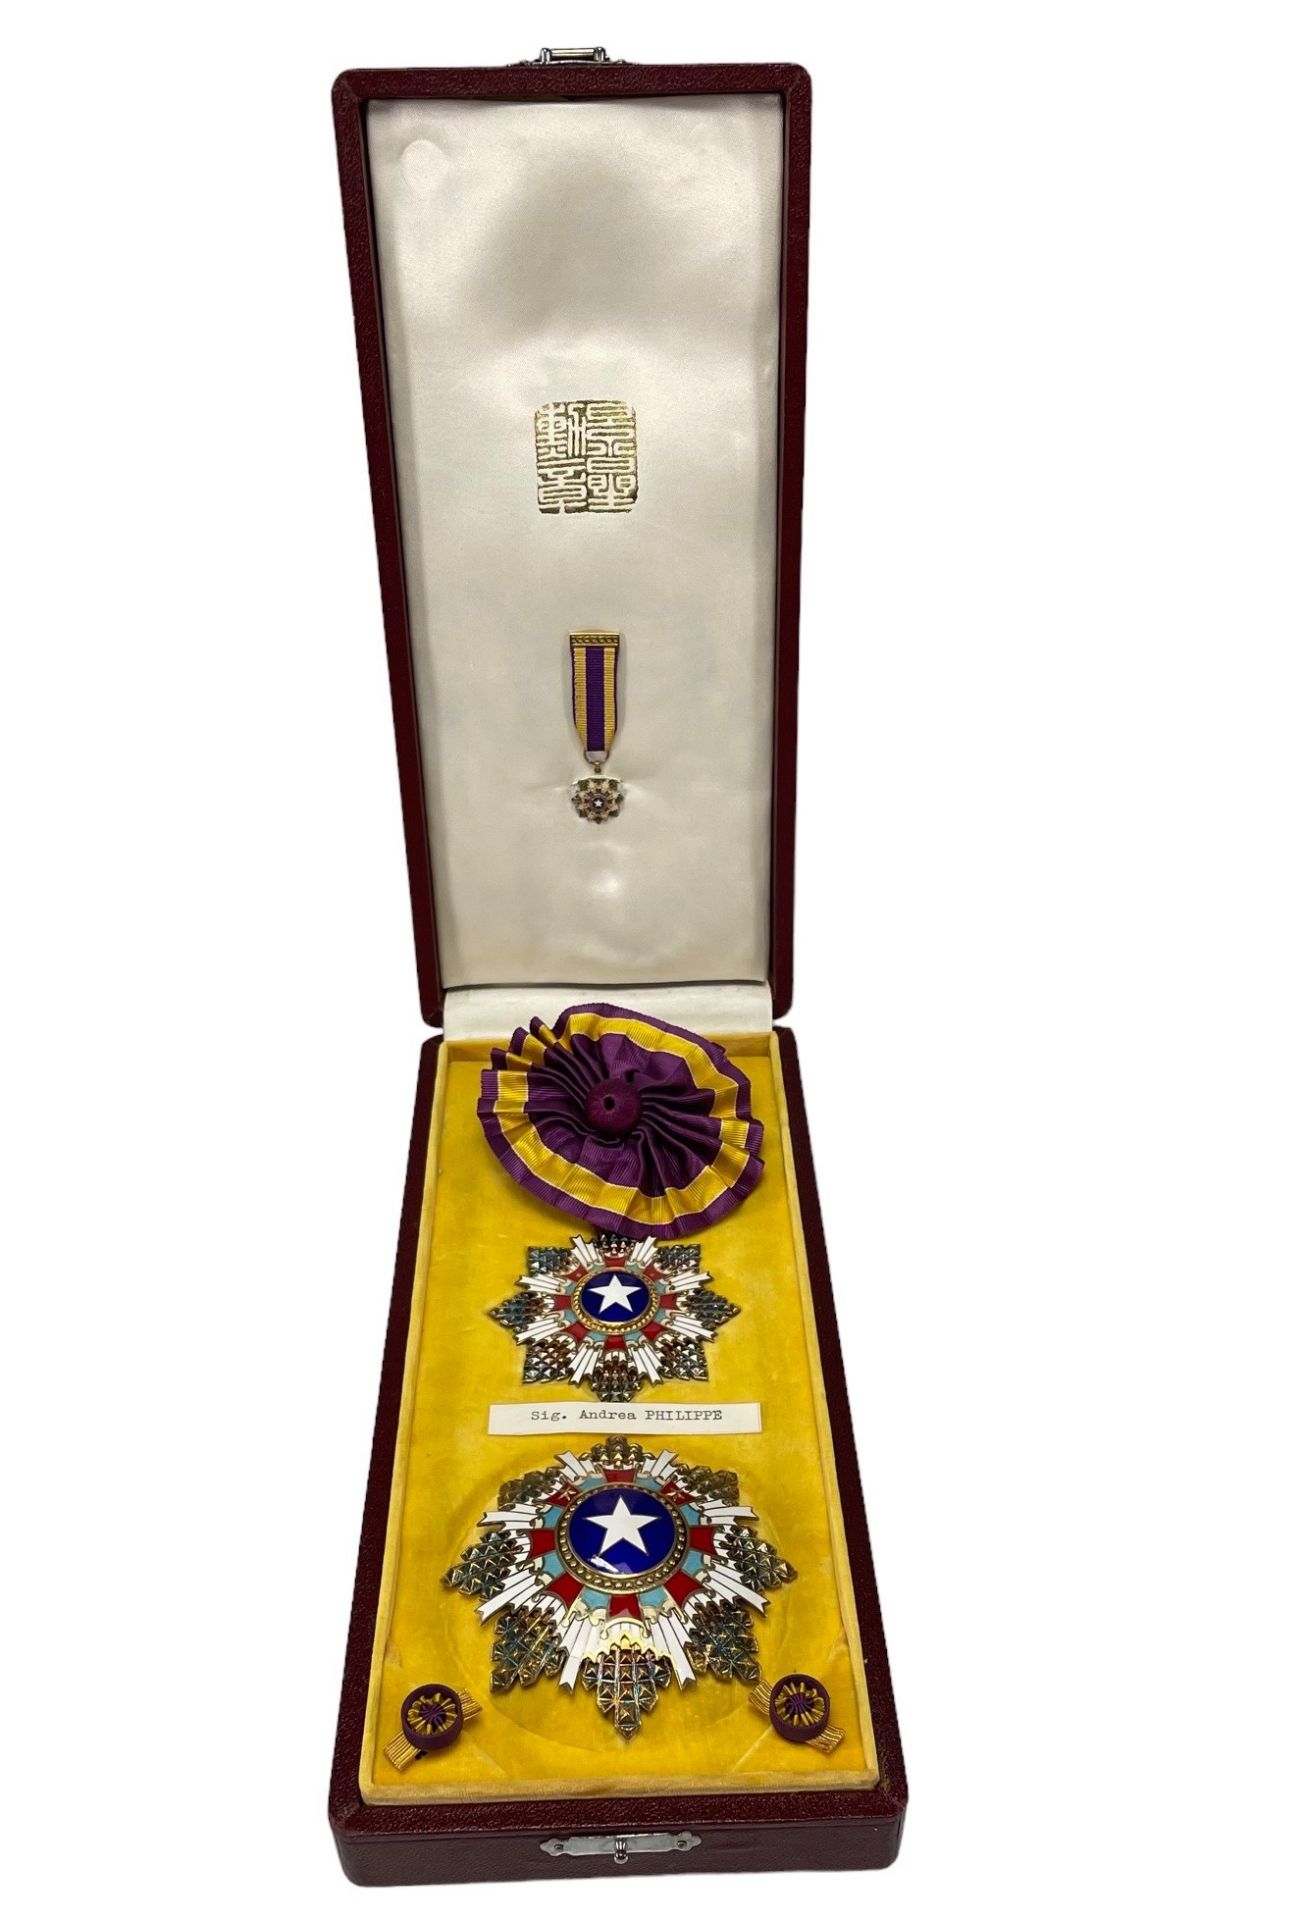 The King Star Medal for outstanding contribution from Taiwan